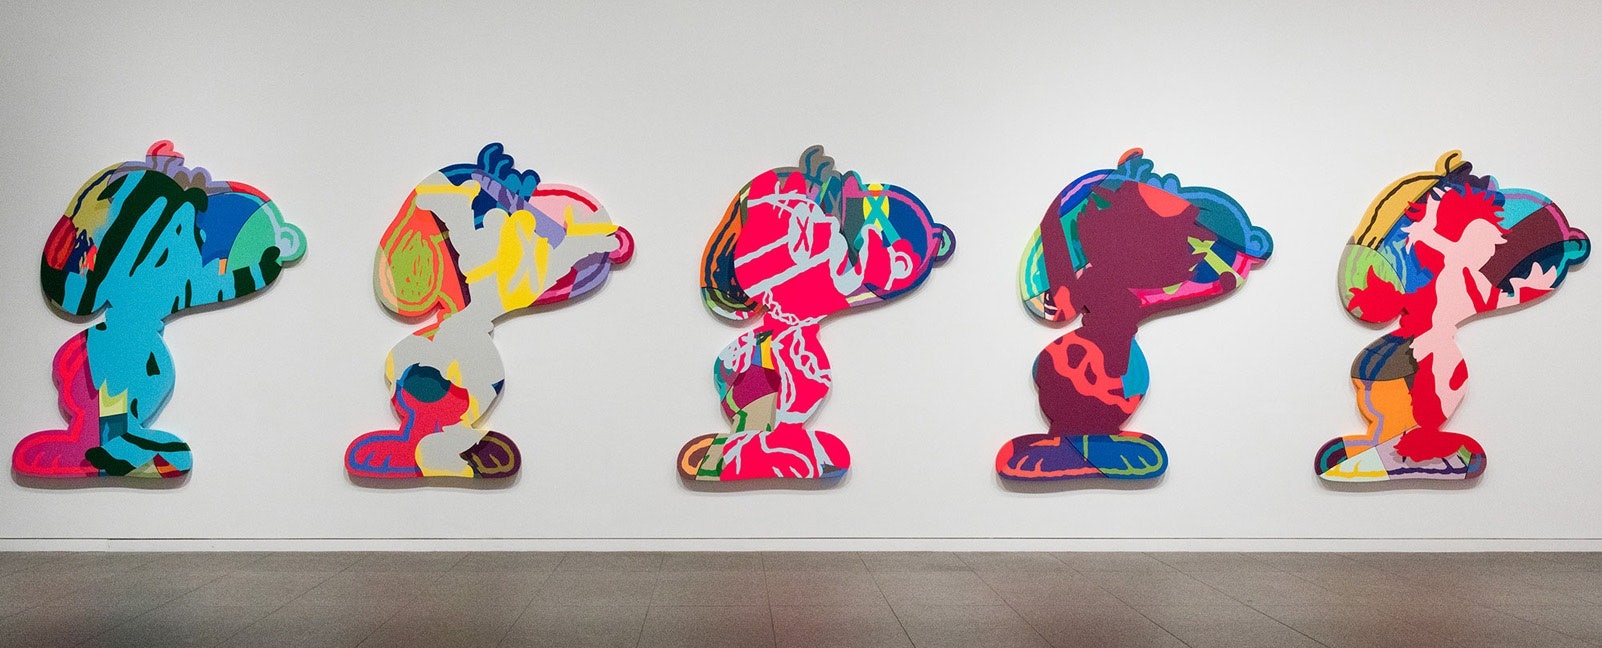 KAWS “FIVE SUSPECTS,” 2016 acrylic on canvas will be displayed at the Yuz exhibition later this March. (Courtesy of Yuz Museum, Private Collection)